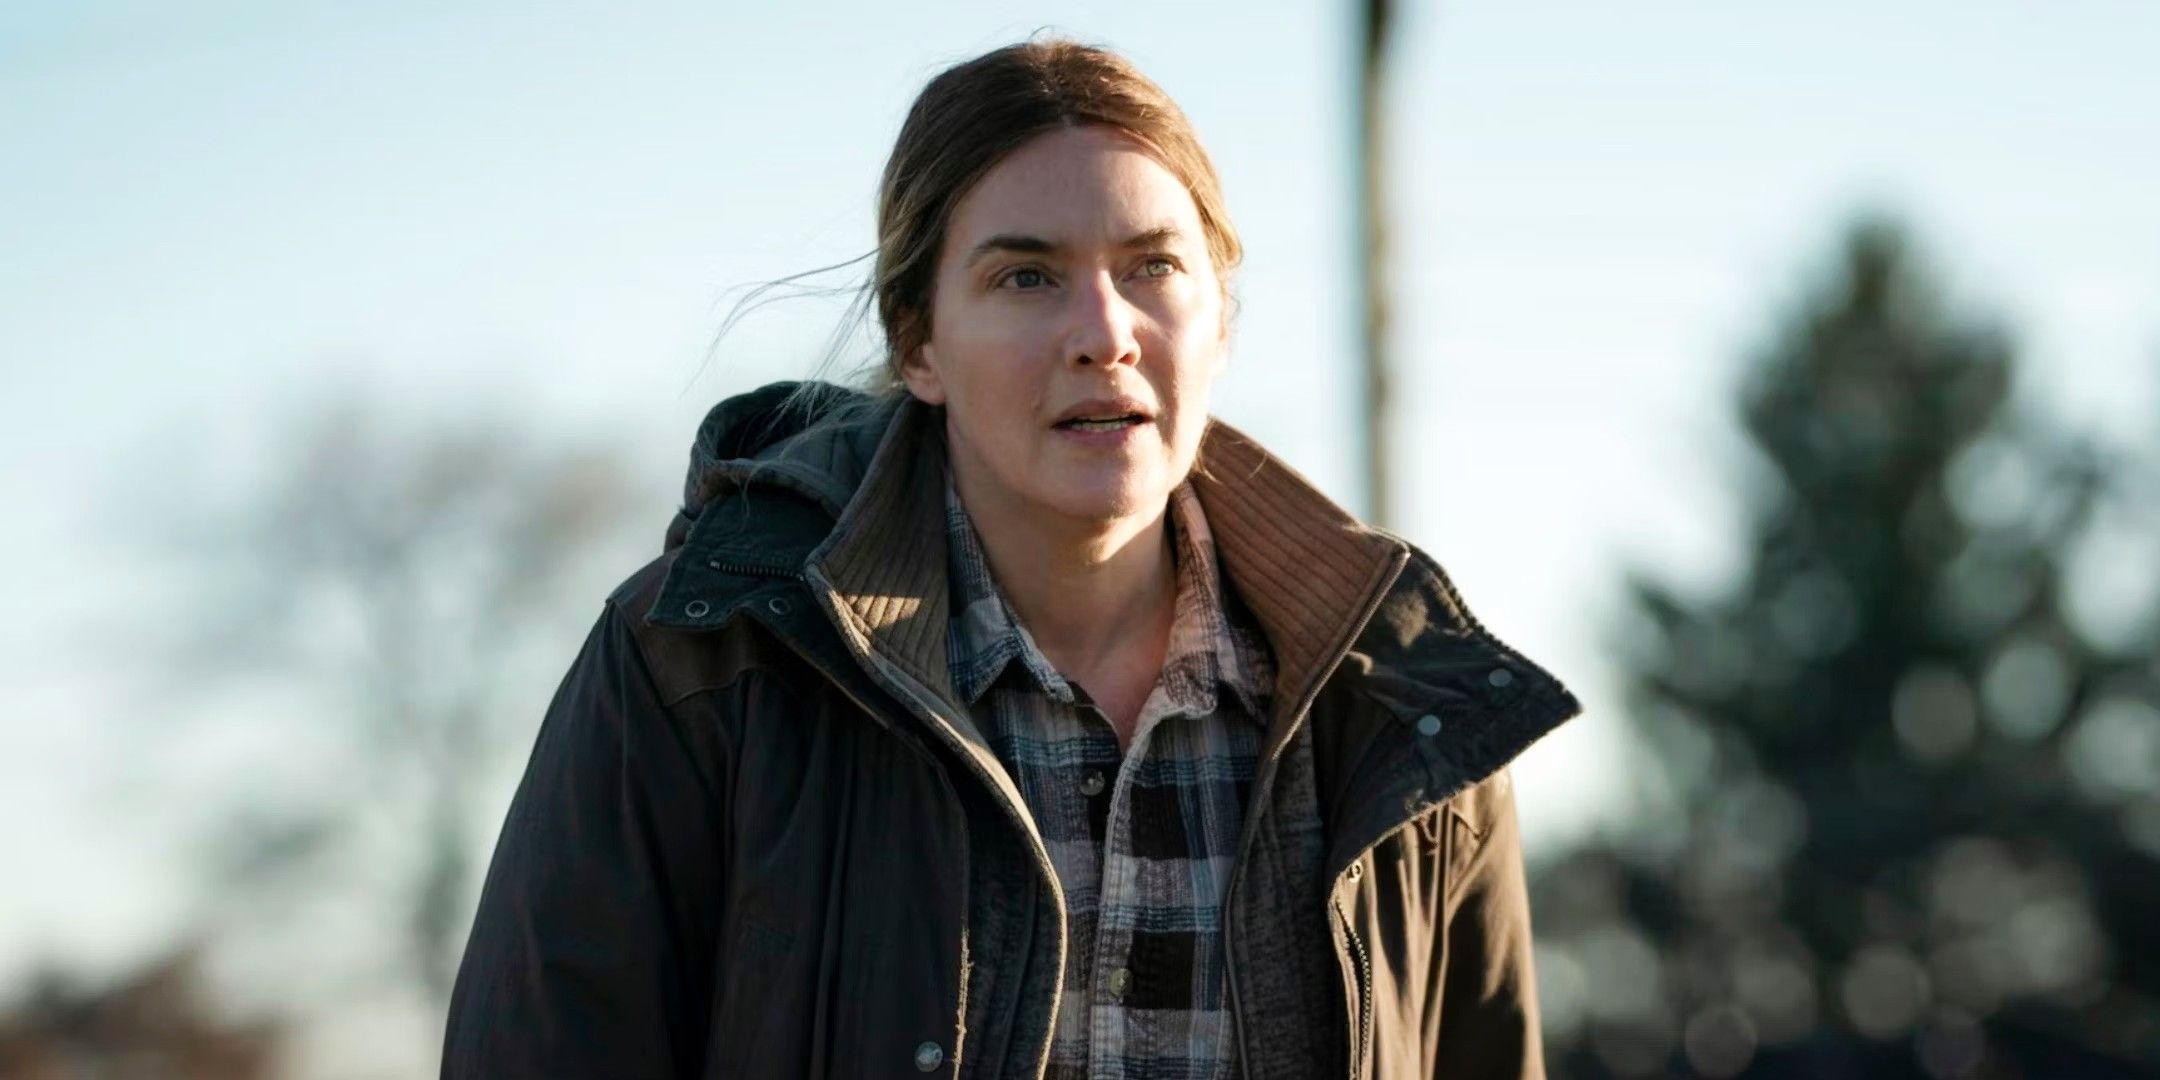 Kate Winslet as Mare Sheehan in Mare of Easttown